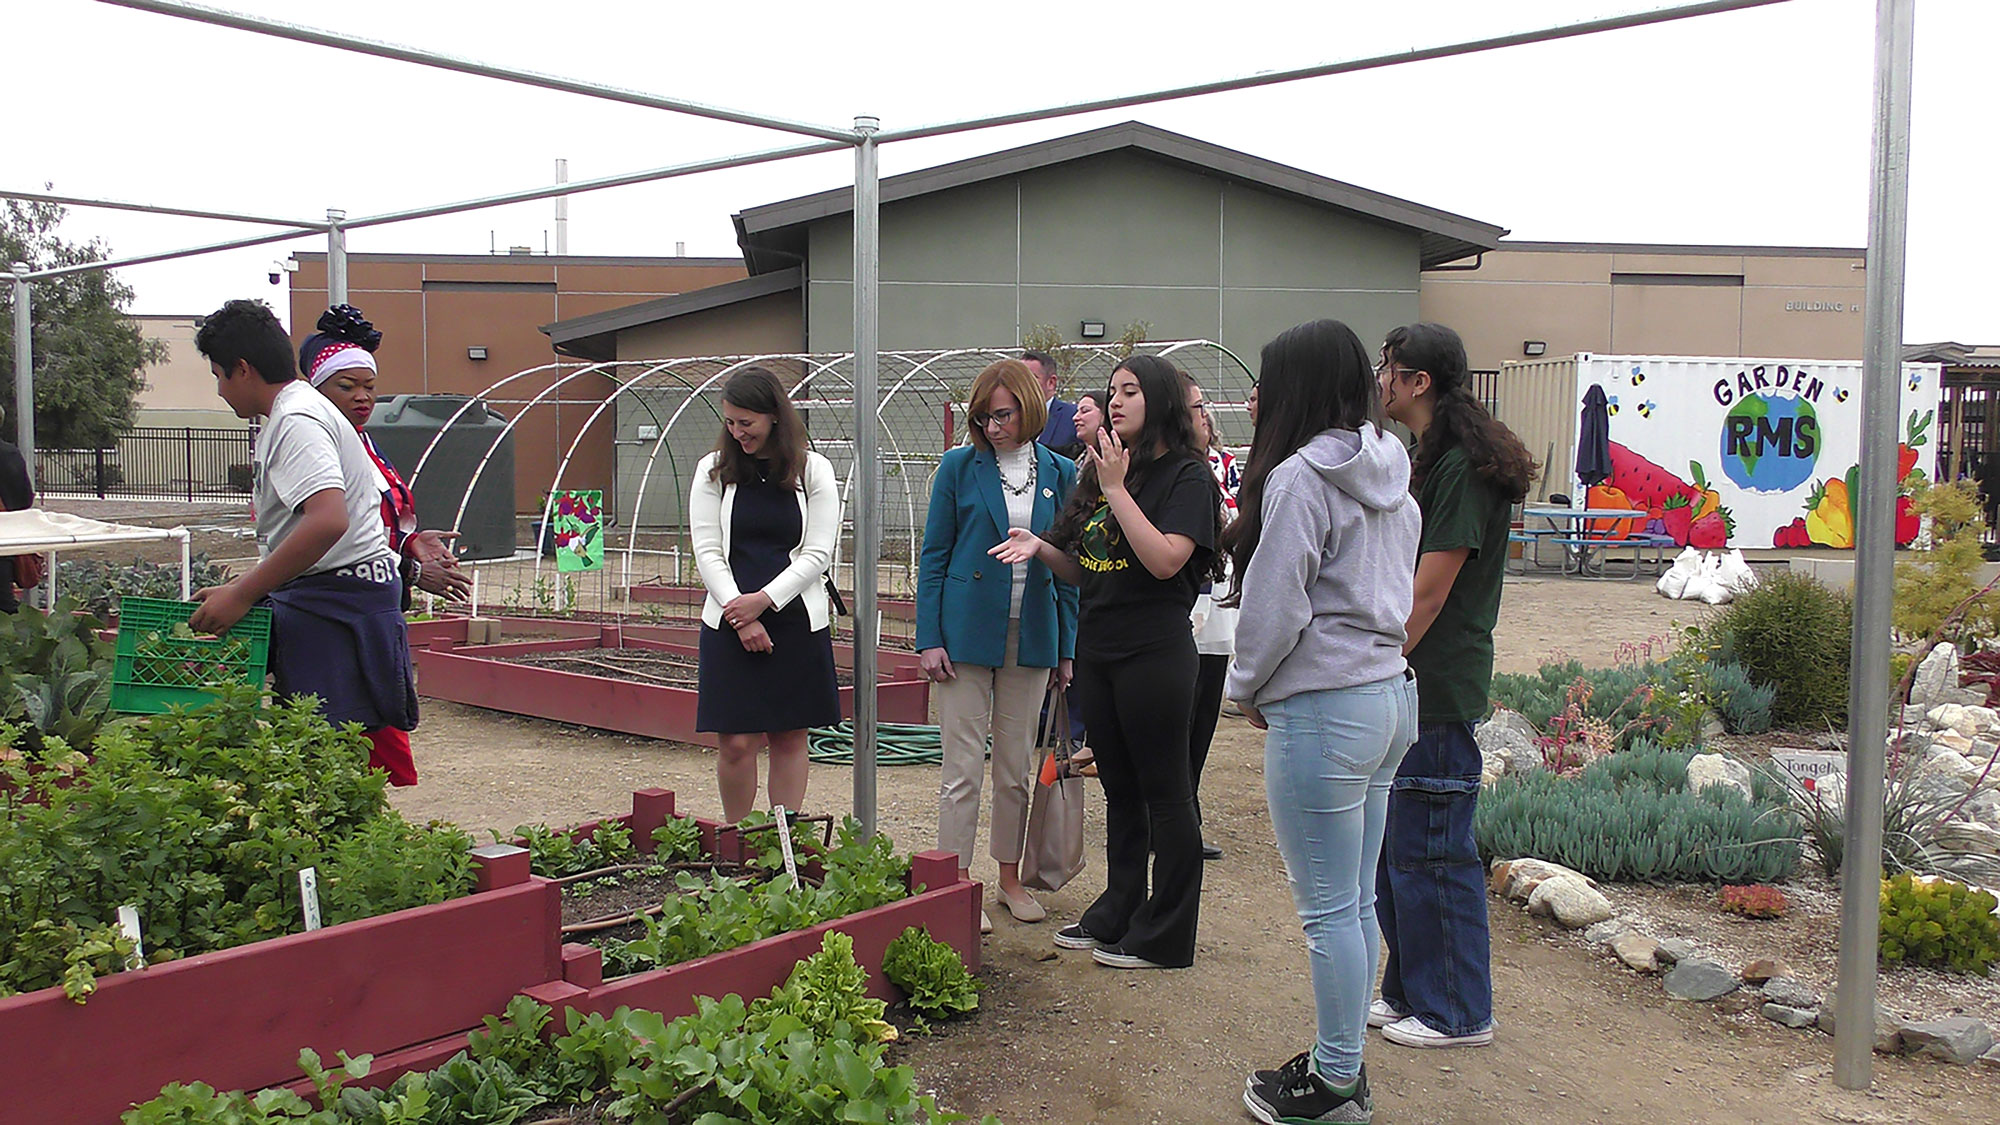 FNS Administrator Cindy Long and several Rialto Middle School students stand in front of planter boxes outside in a school garden